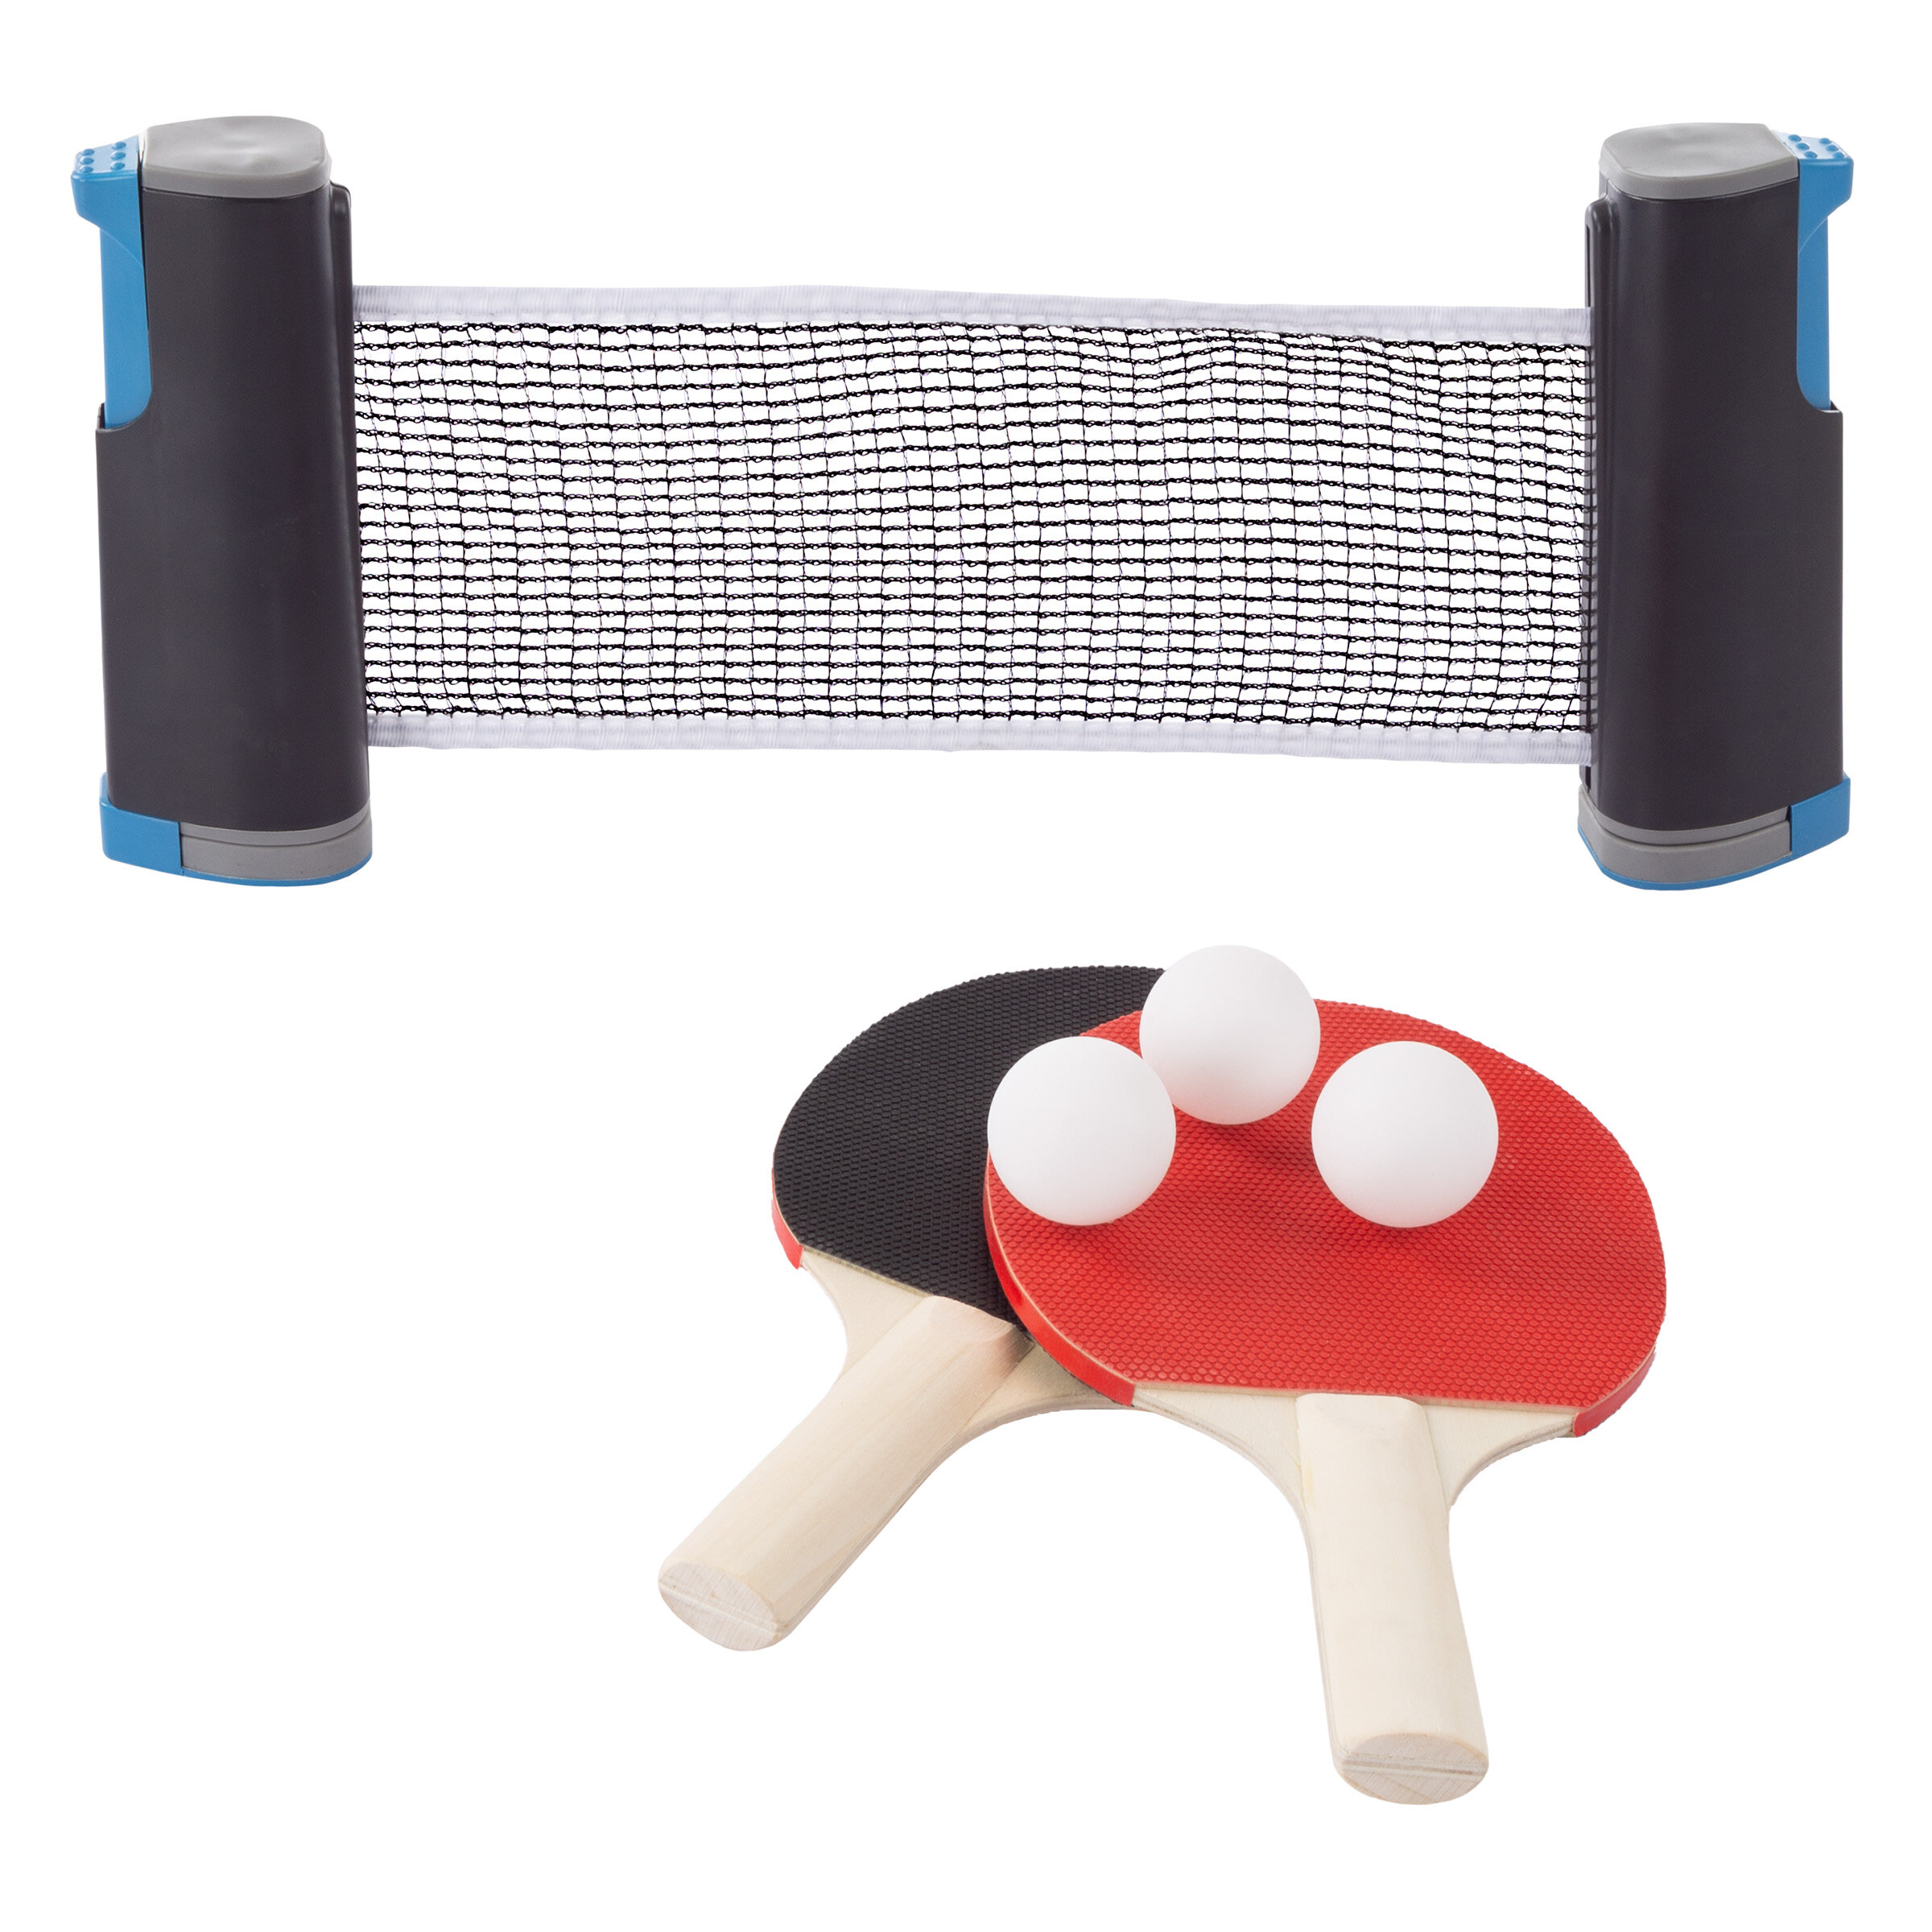 Portable Ping Pong Kit for Children Adults and Beginners Outdoor Indoor Sports Games Equipment Includes 2 Table Tennis Paddle and 3 Balls Kaiyan Professional Table Tennis Bat Set